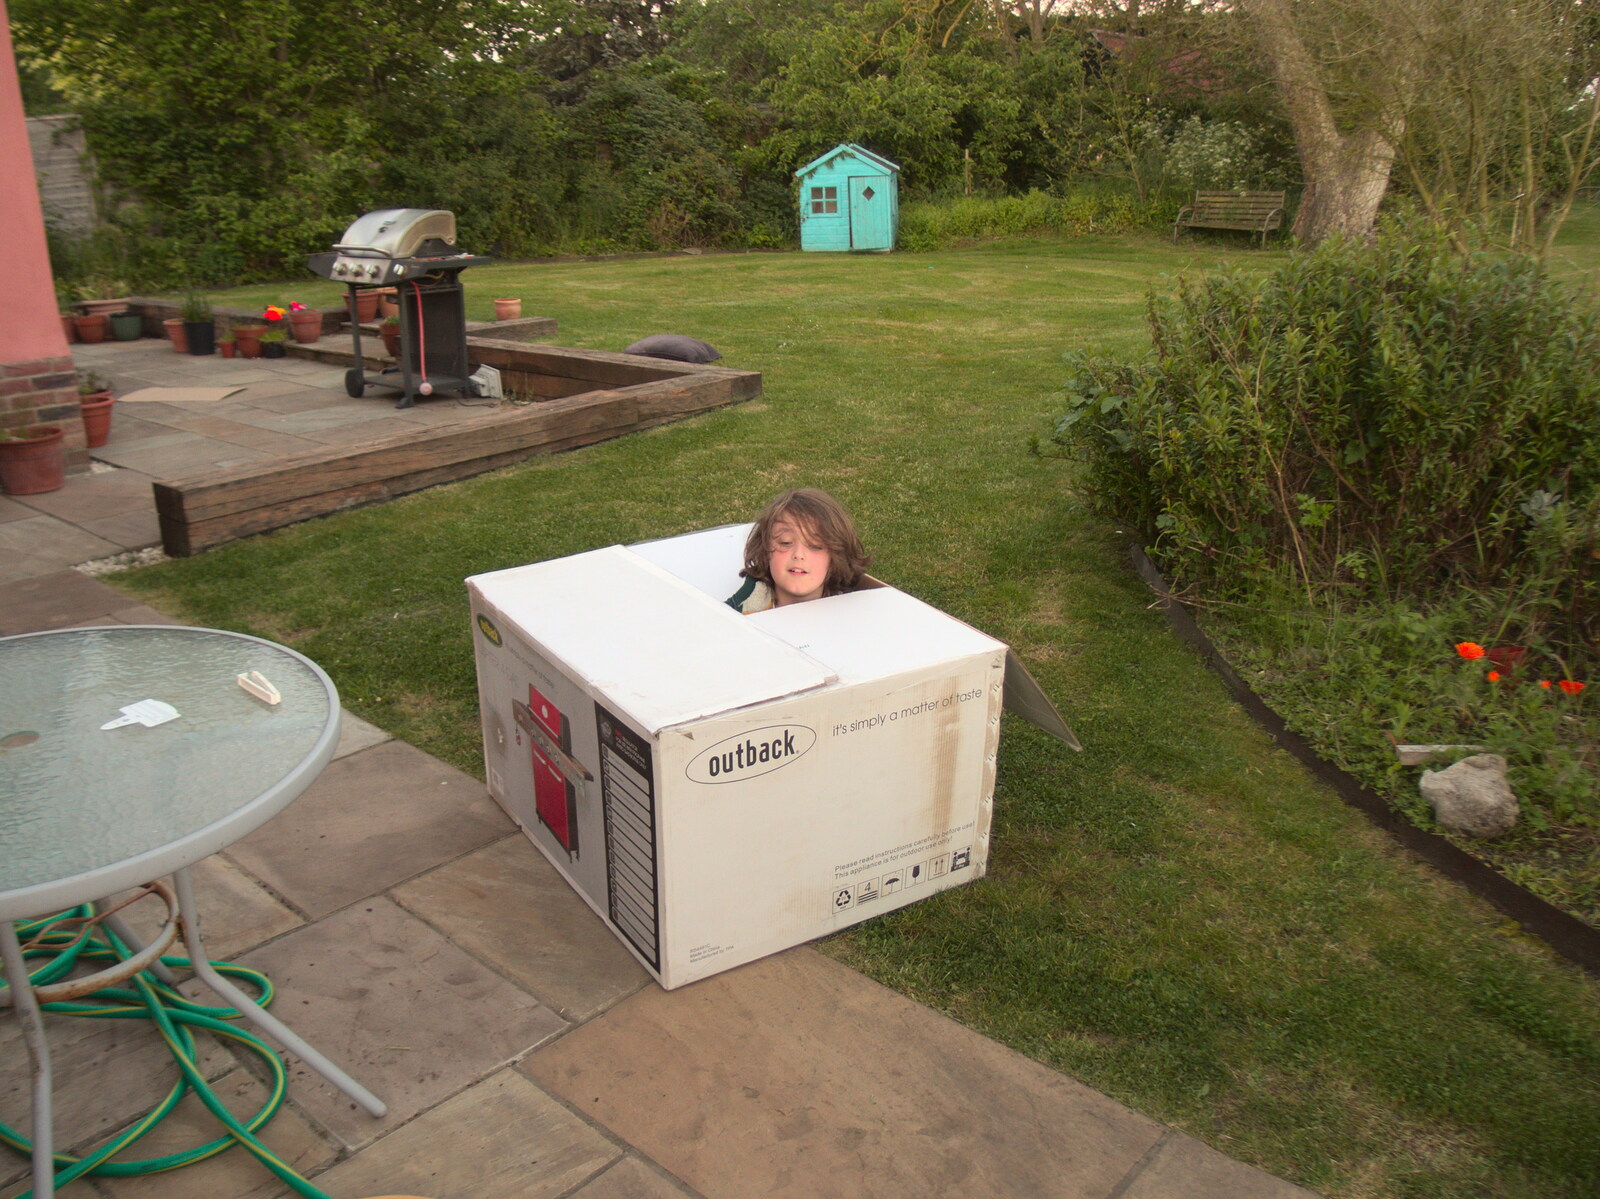 Boy in a box from Garden Centres, and Hamish Visits, Brome, Suffolk - 28th May 2021